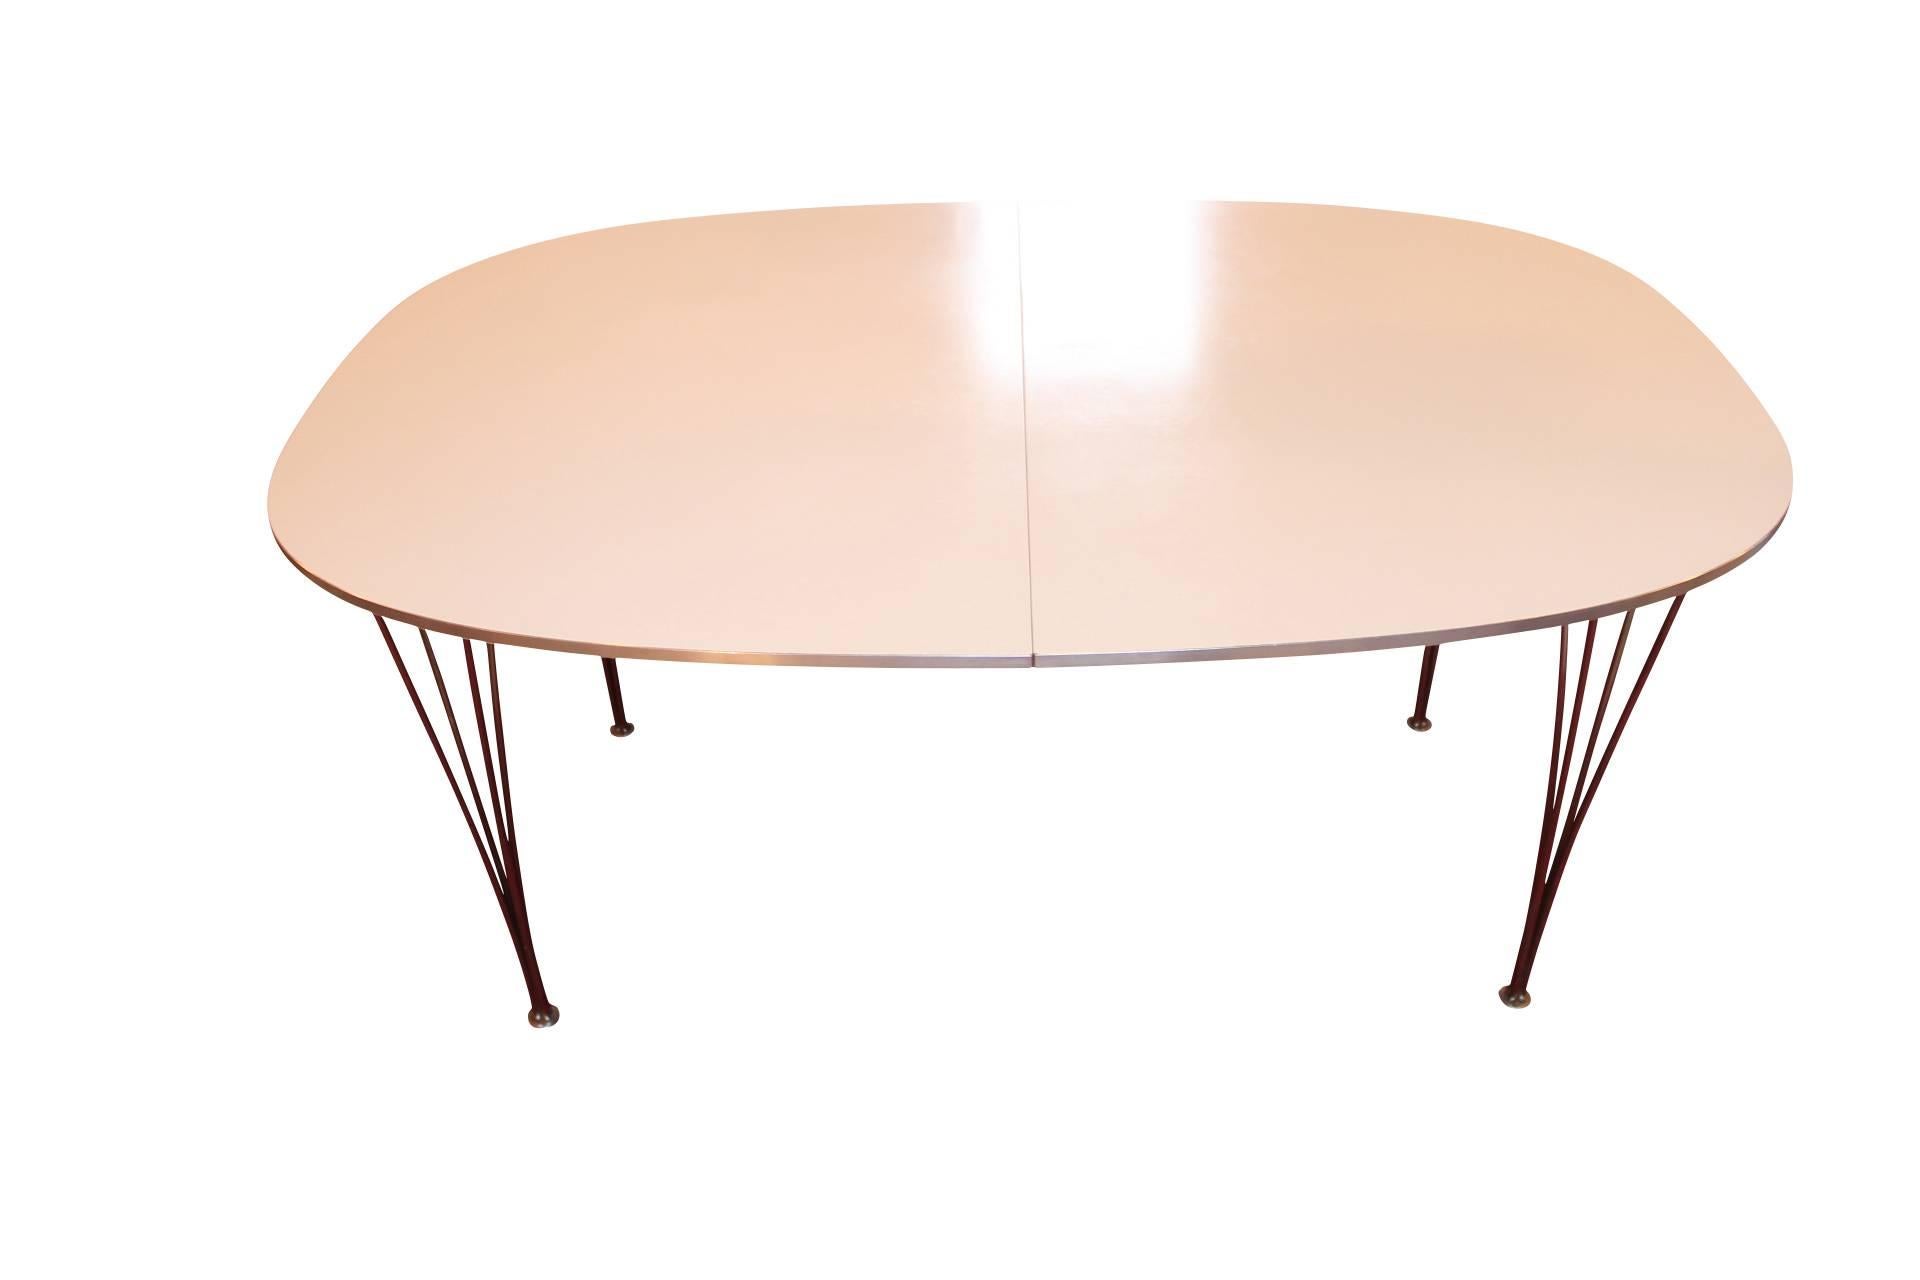 The extension table model B618, designed by Piet Hein and Bruno Mathsson in 1968 and manufactured by Fritz Hansen, is a versatile and iconic piece of furniture.

Piet Hein was a Danish mathematician, designer, and inventor, while Bruno Mathsson was